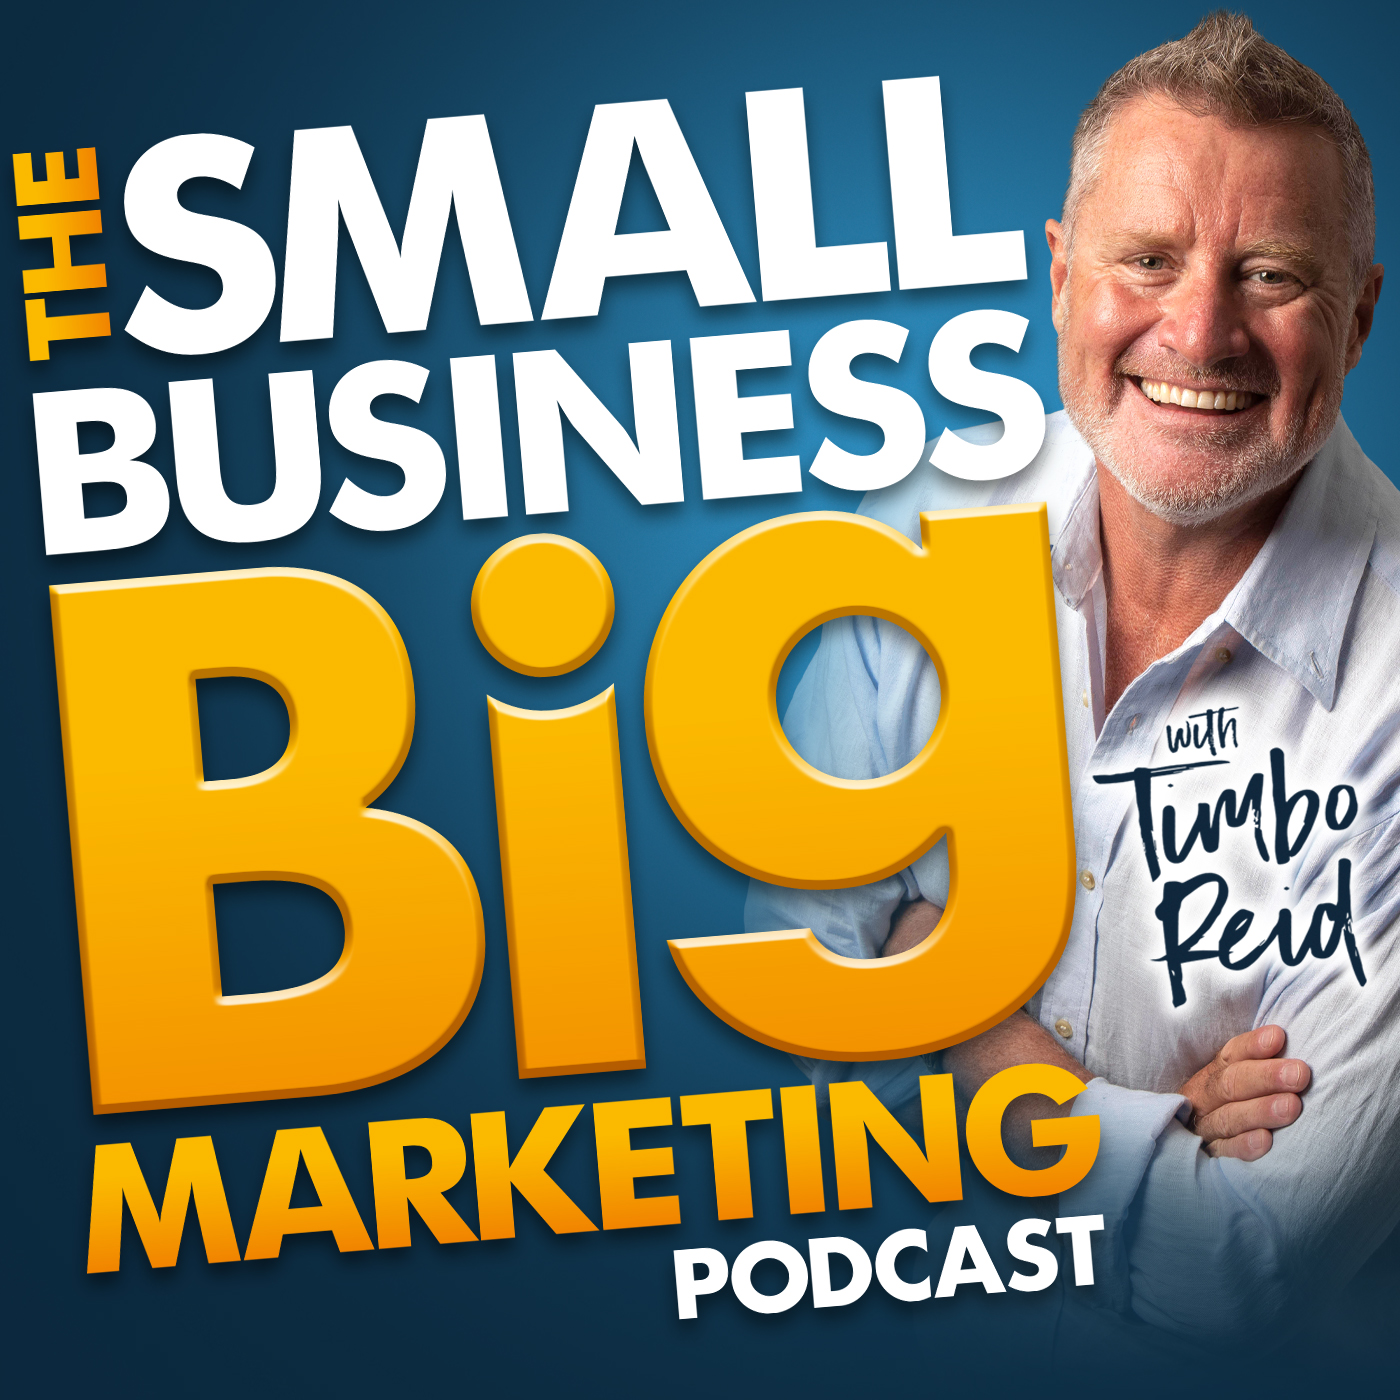 How to successfully market your small business | #583